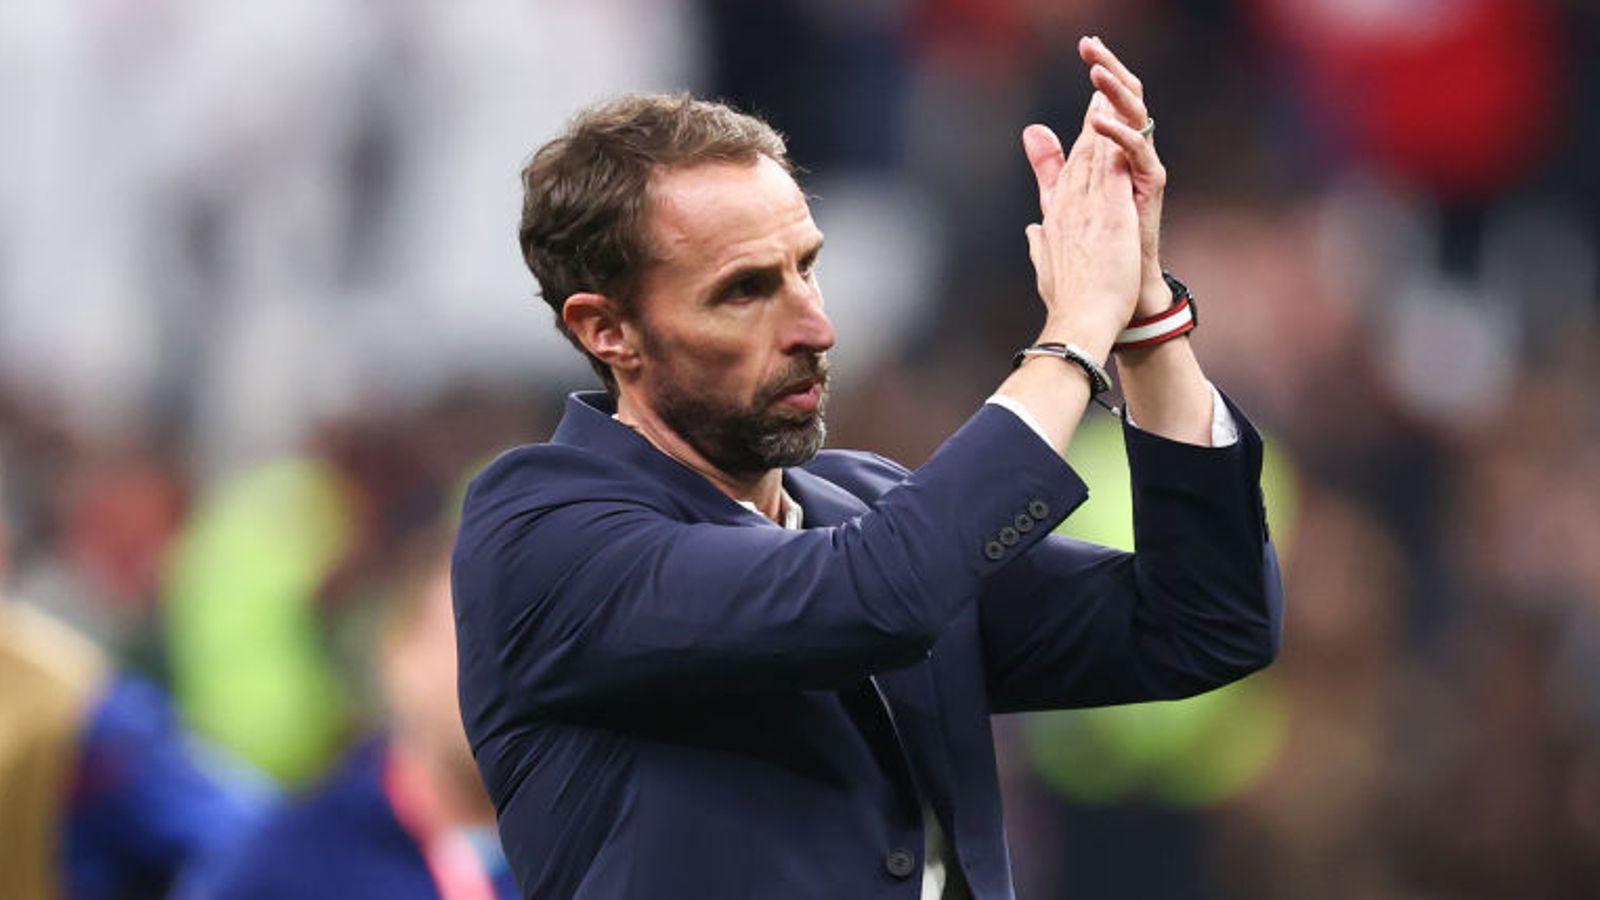 Gareth Southgate intends to stay on as England manager until Euro 2024